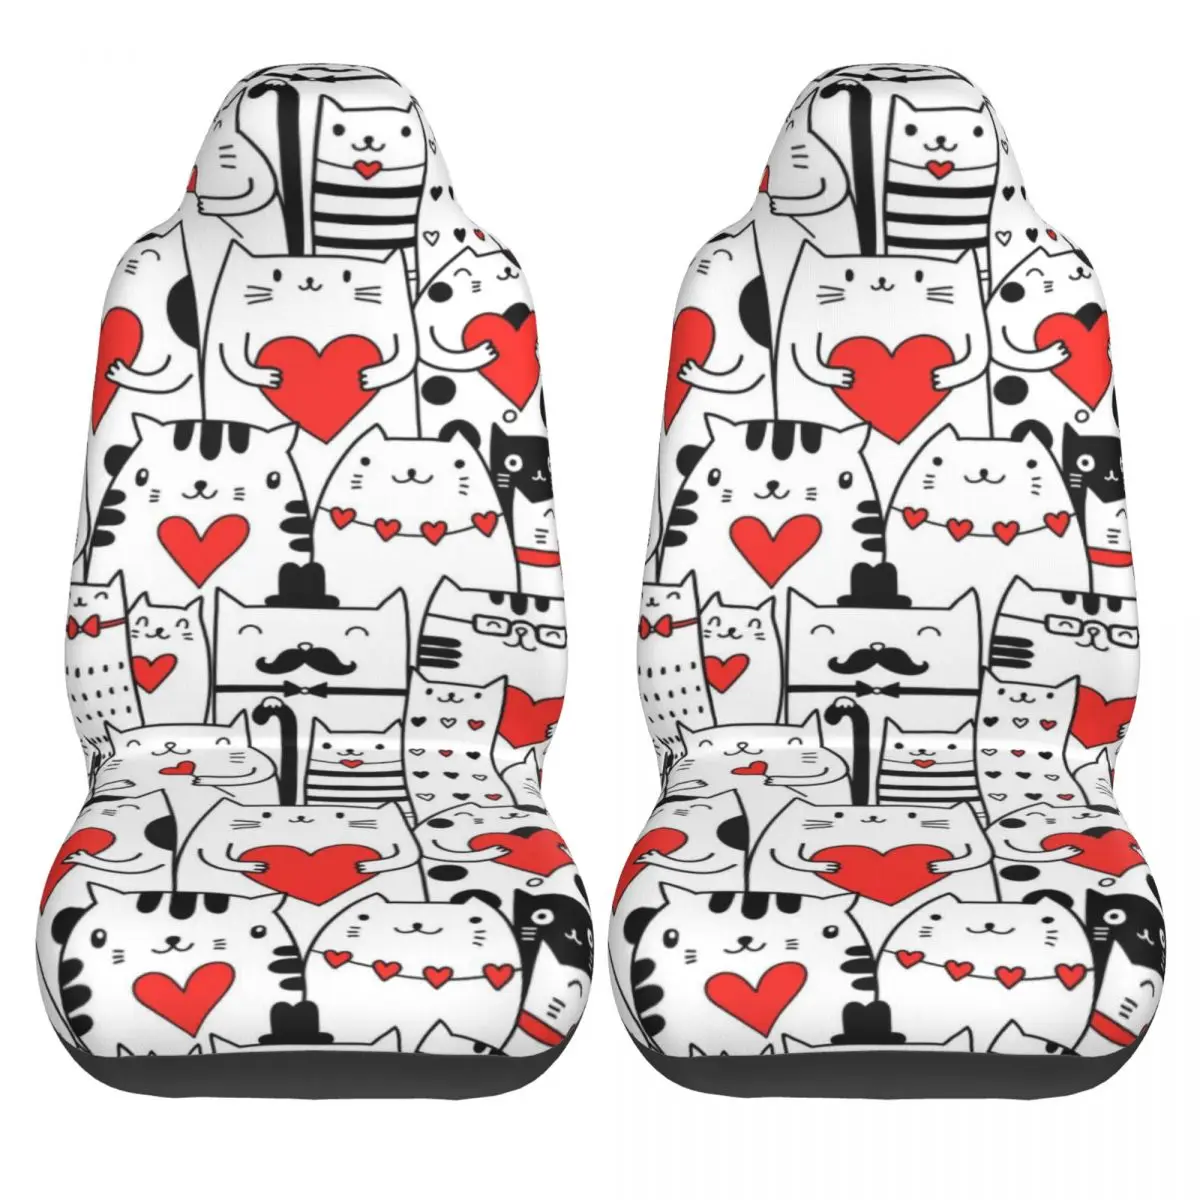 

2 pcs Car Seat Cover Black White Cats Holding Hearts Universal Wear Dirt-resistant Protector for Car Easy Cleaning